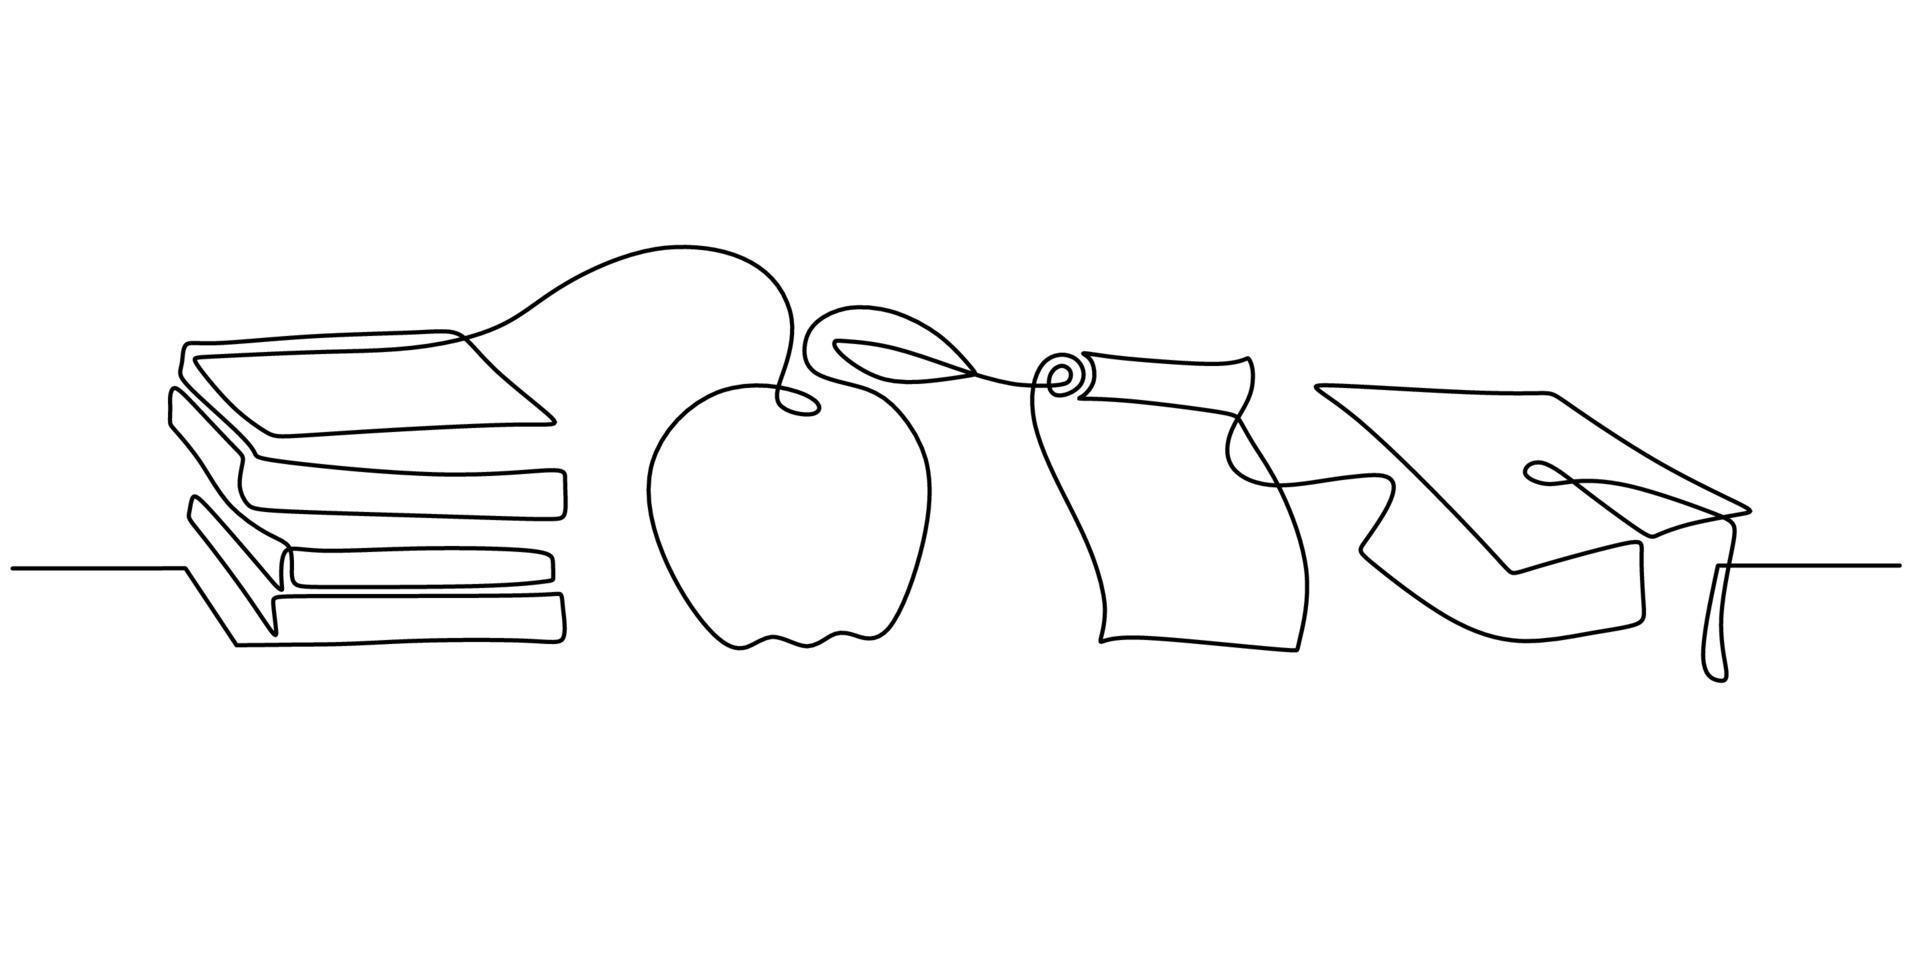 Continuous one single line of book, apple, paper and graduation hat vector